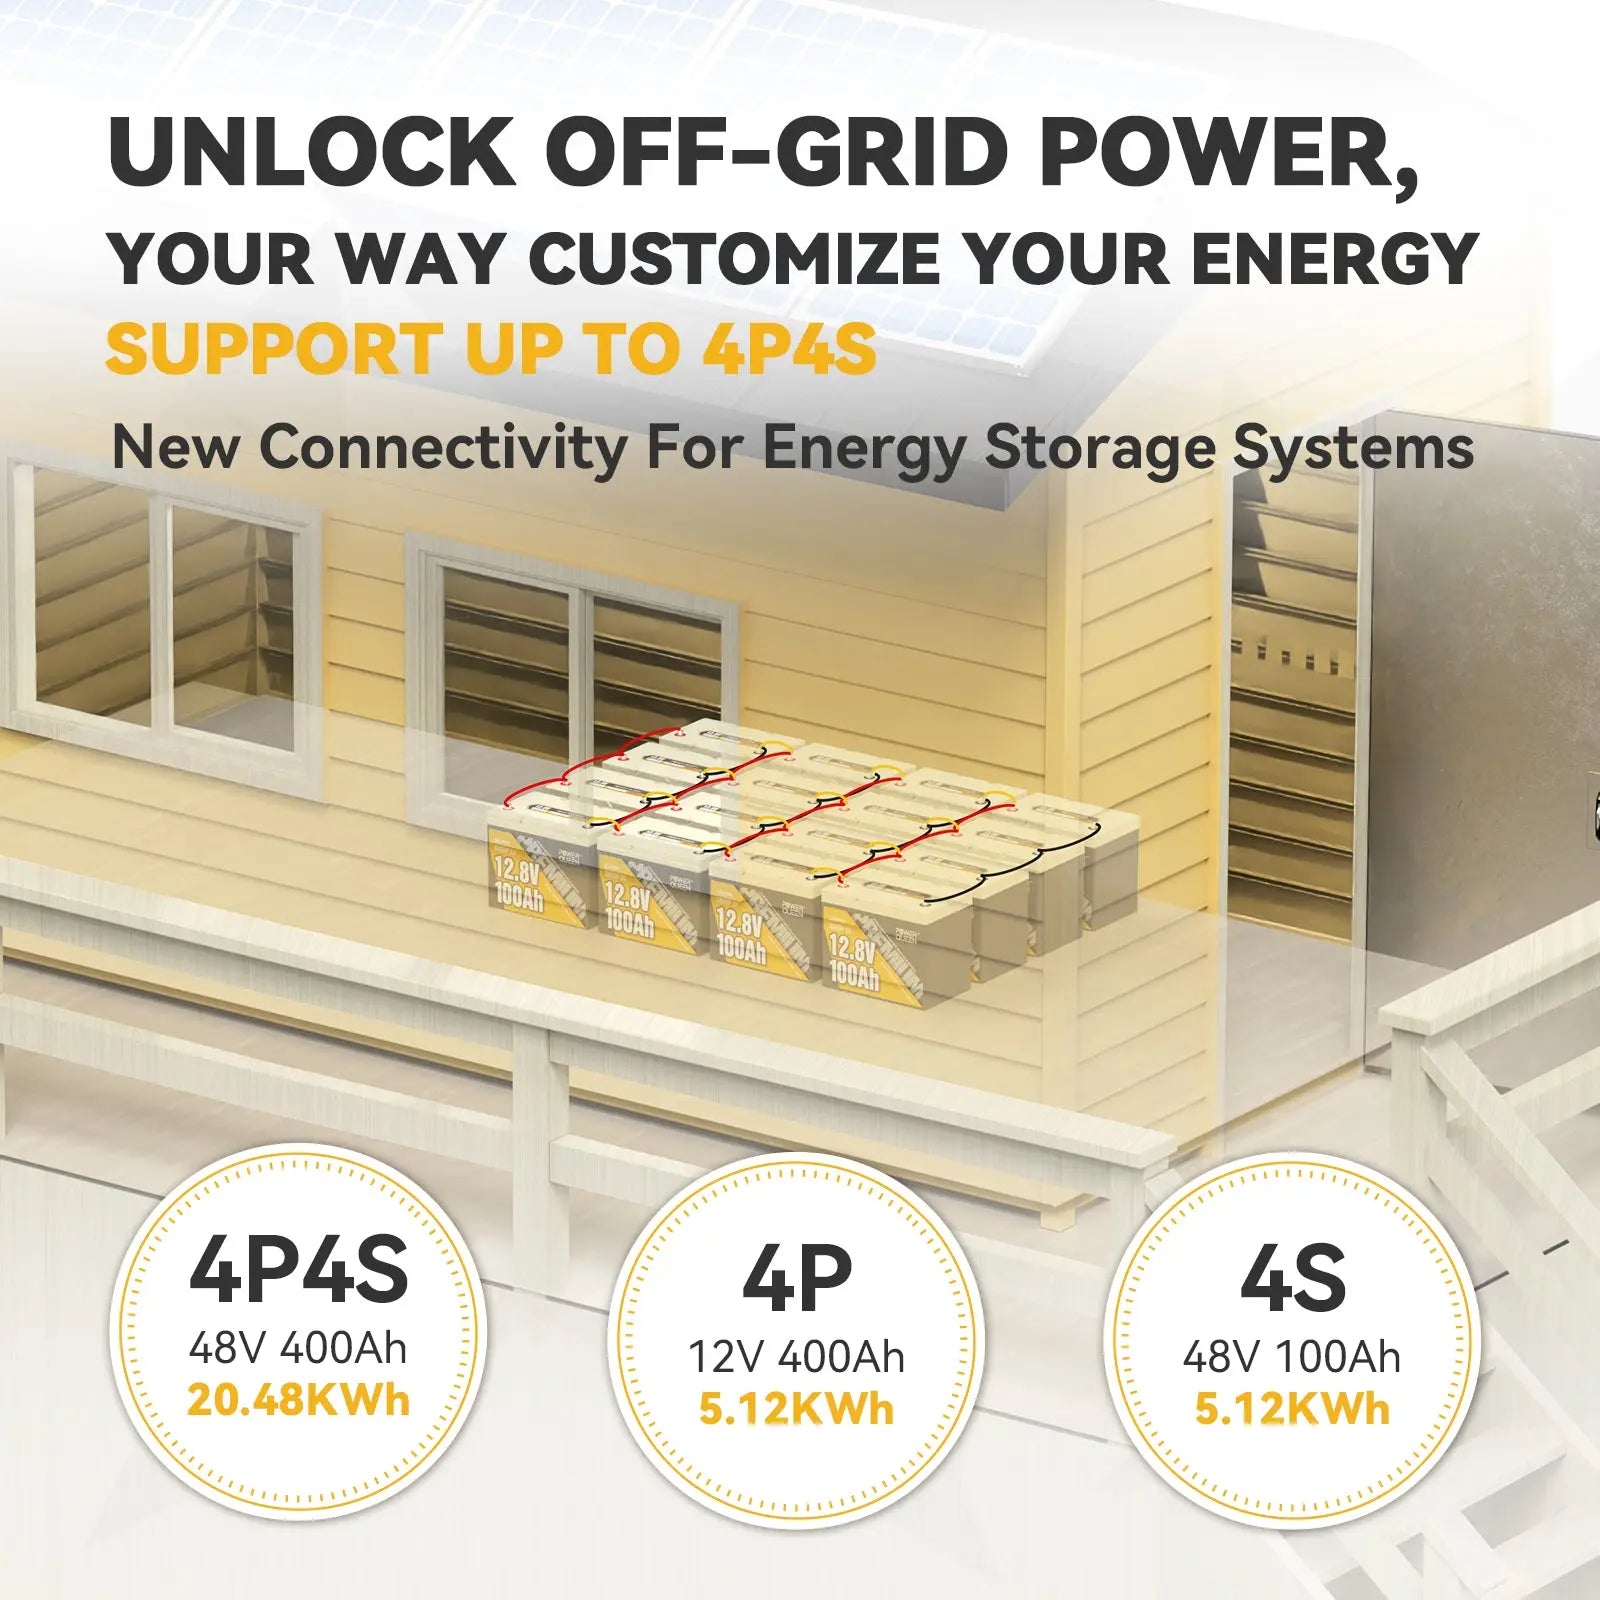 support up to 4P4S new connectivity for energy storage systems